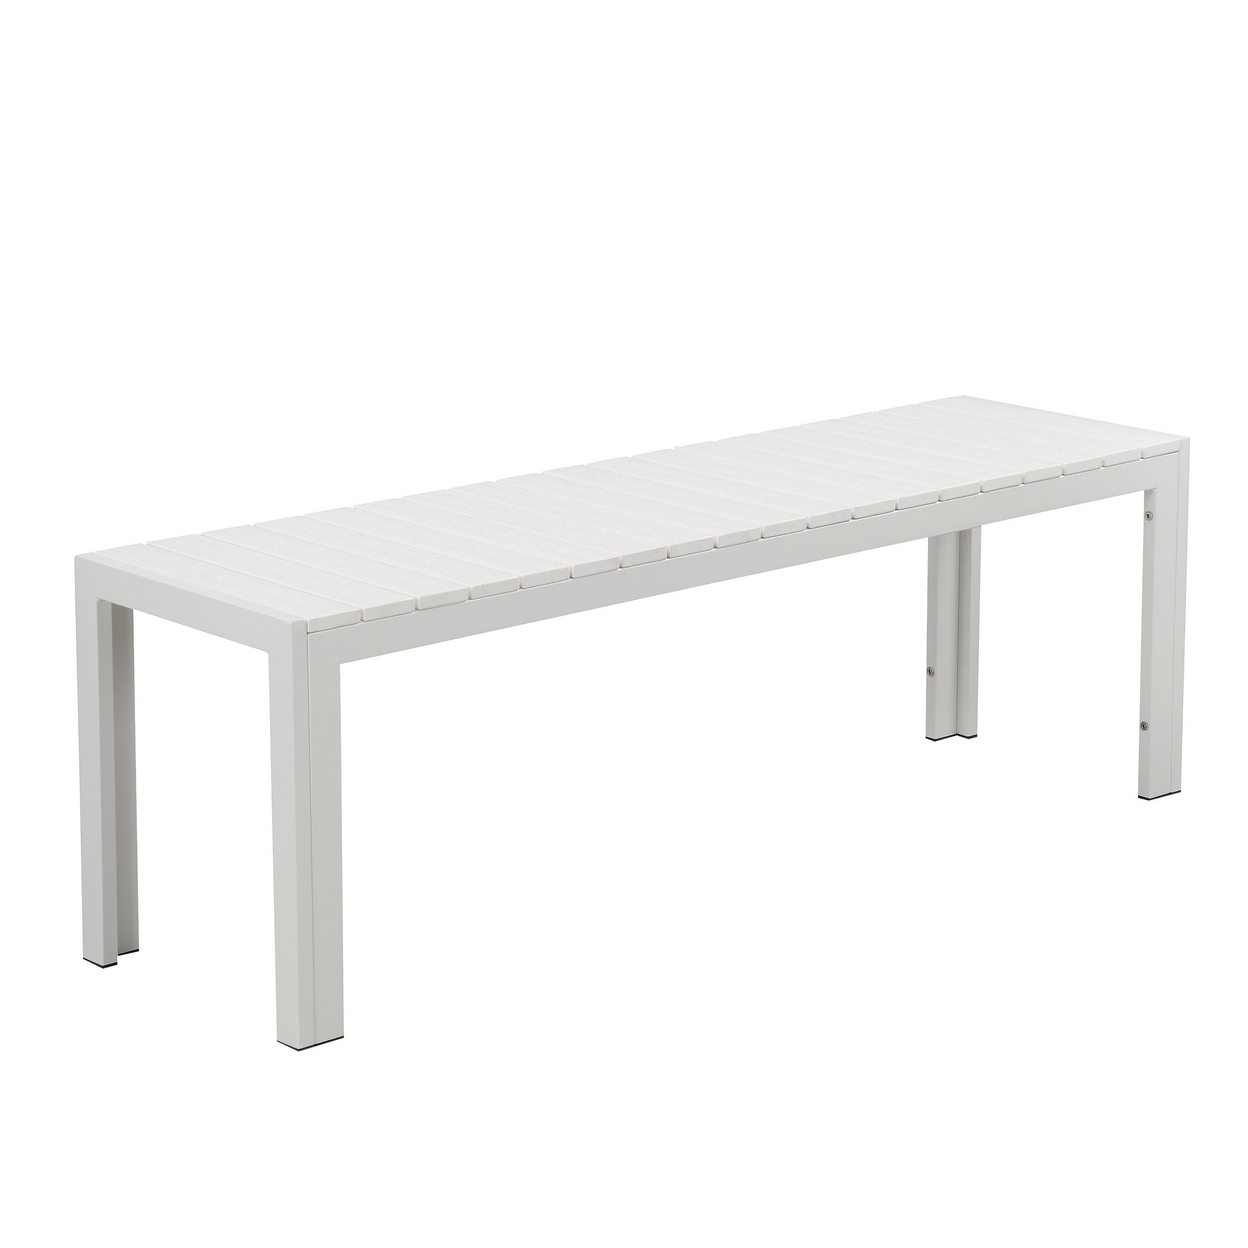 Theo 53 Inch Outdoor Bench, White Aluminum Frame, Plank Style Seat Surface- Saltoro Sherpi